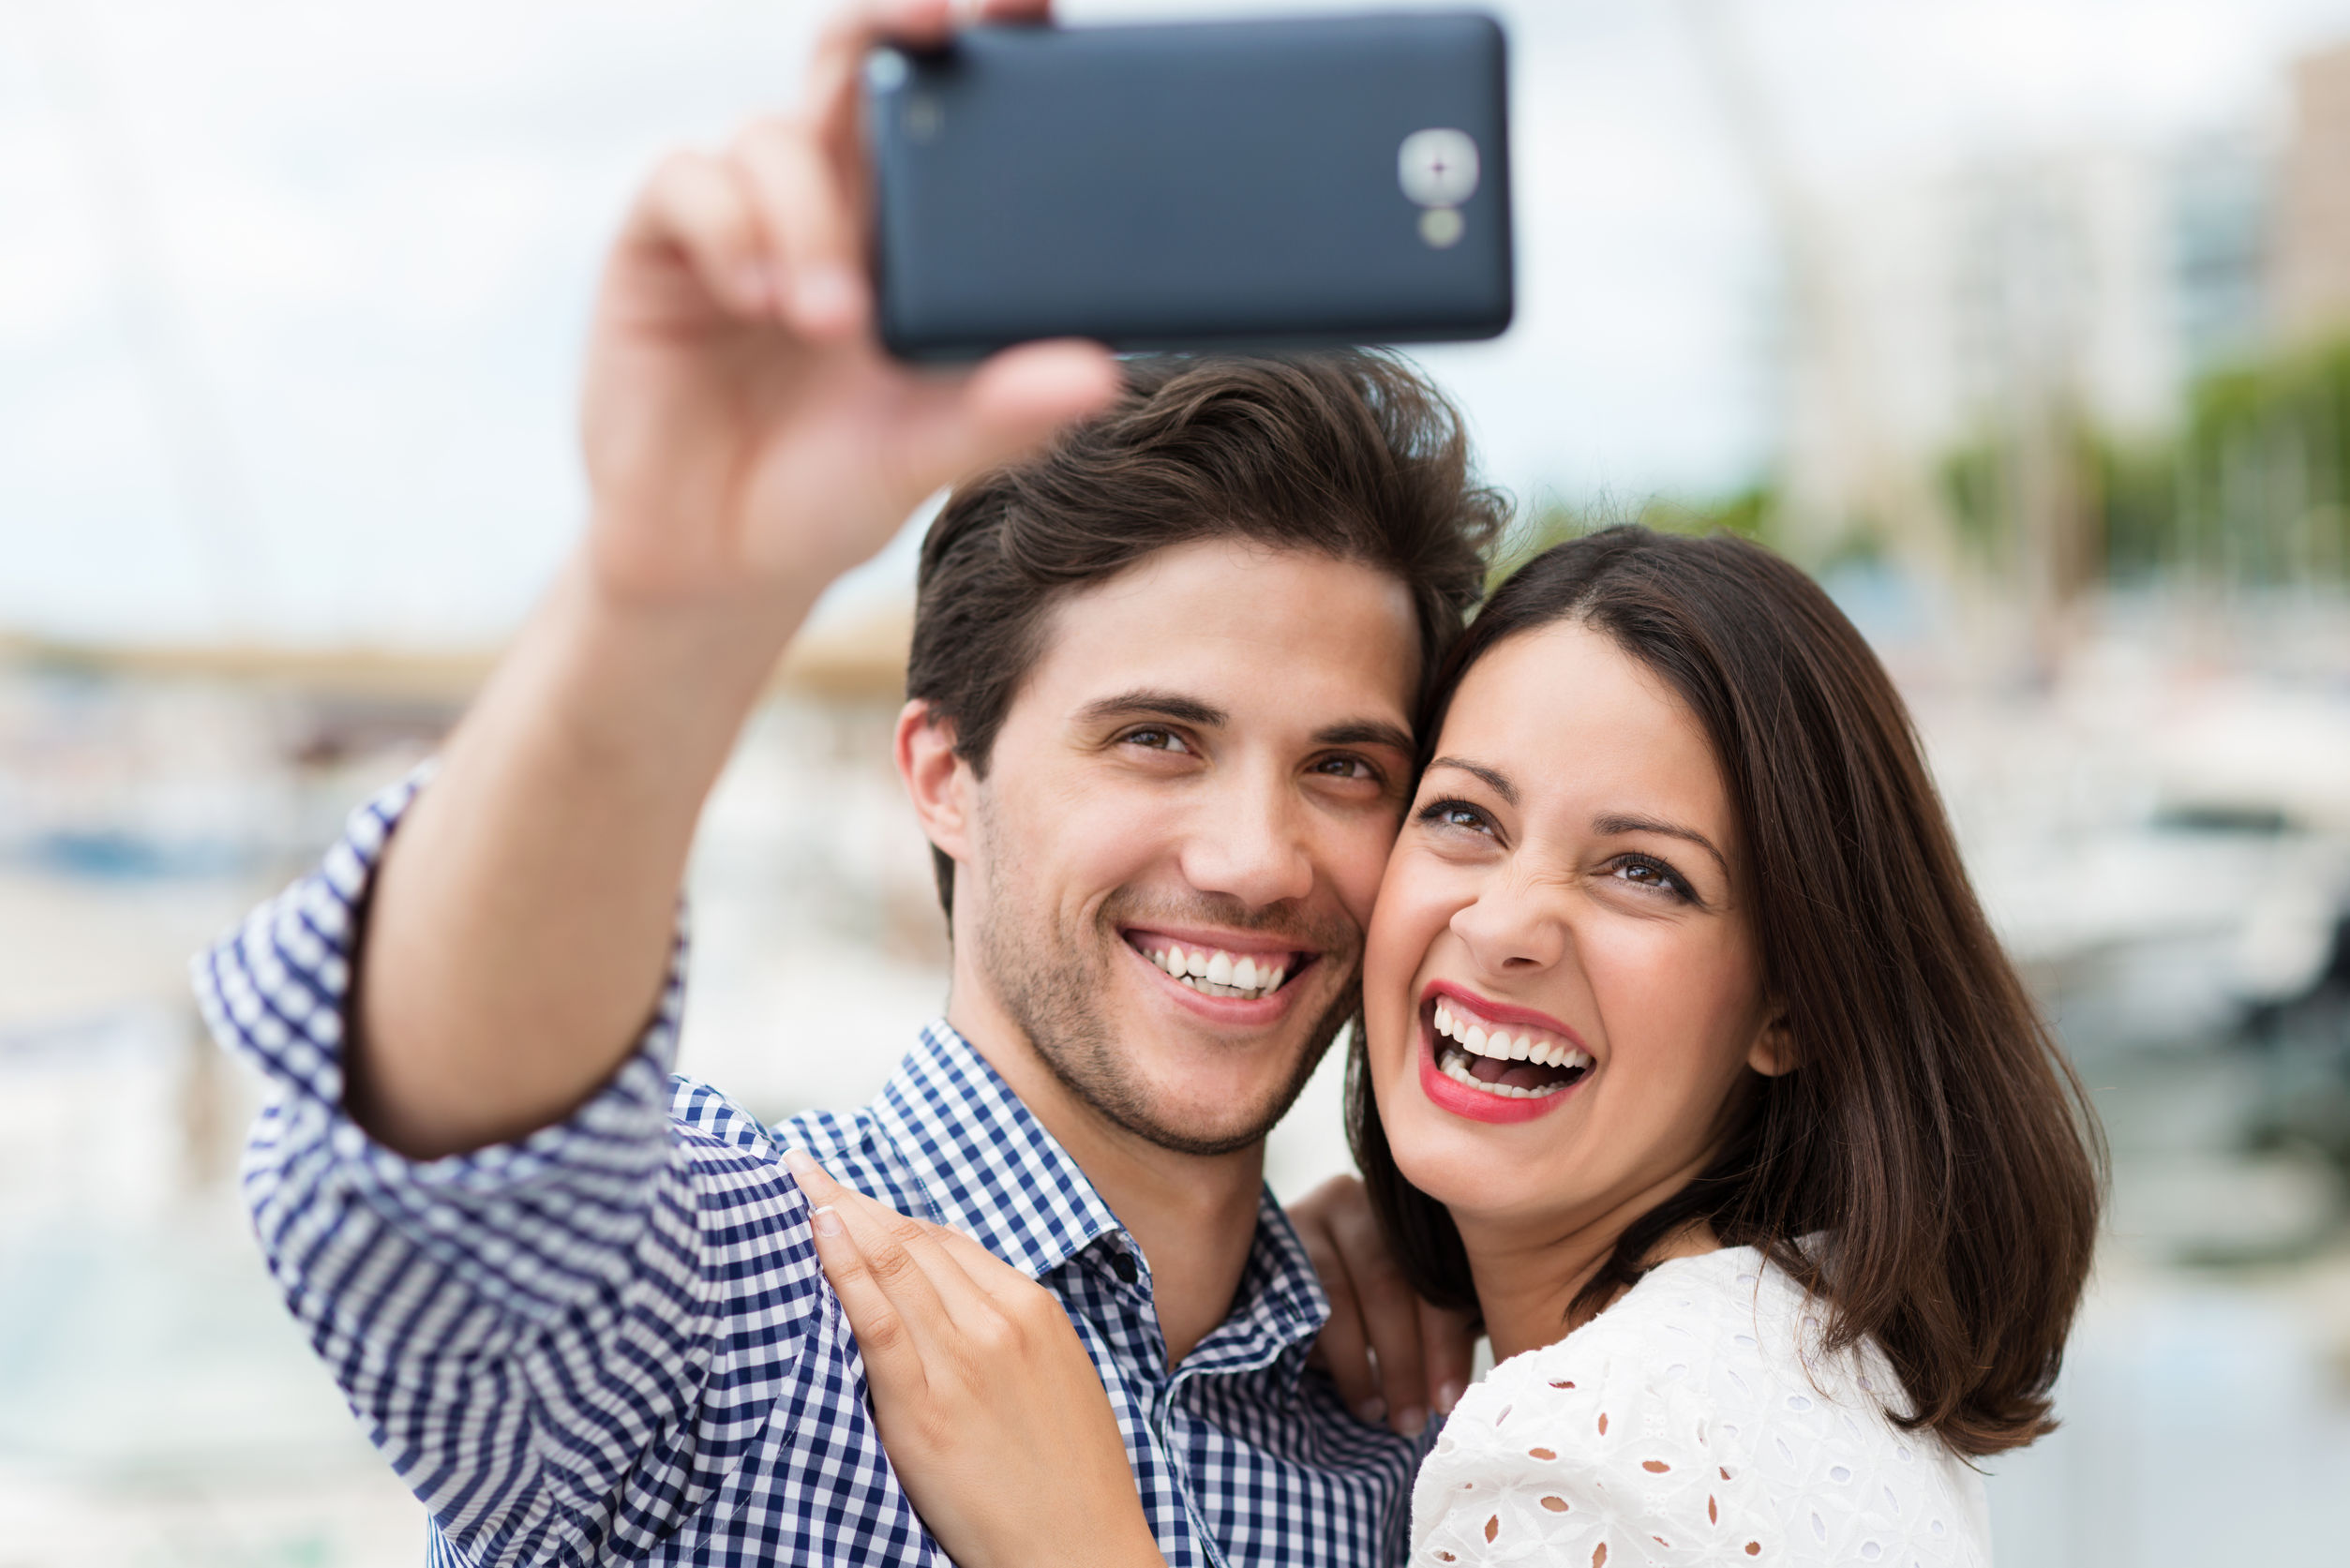 Couple posing for selfie, Stock Photo, Picture And Royalty Free Image. Pic.  ZSH-DAA086000568 | agefotostock